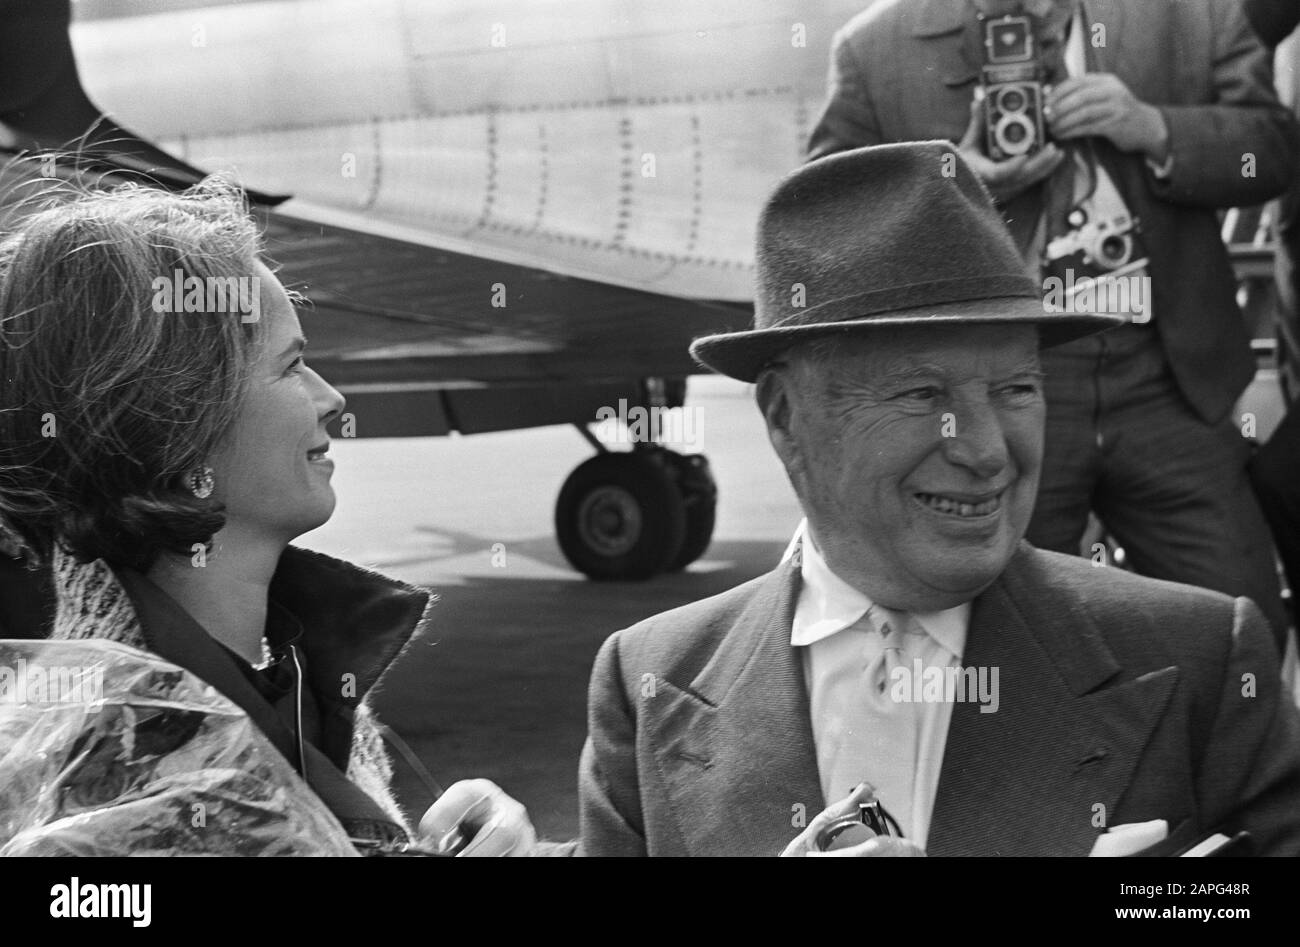 Arrival of actors Charlie Chaplin and Peter Ustinov and their wives at Schiphol Description: Charlie Chaplin and wife Oona O'Neill Date: 23 June 1965 Location: Noord-Holland, Schiphol Keywords: arrivals, arrivals, etc. actors, wives Personal name: Chaplin, Charlie, Neill, Oona O' Stock Photo